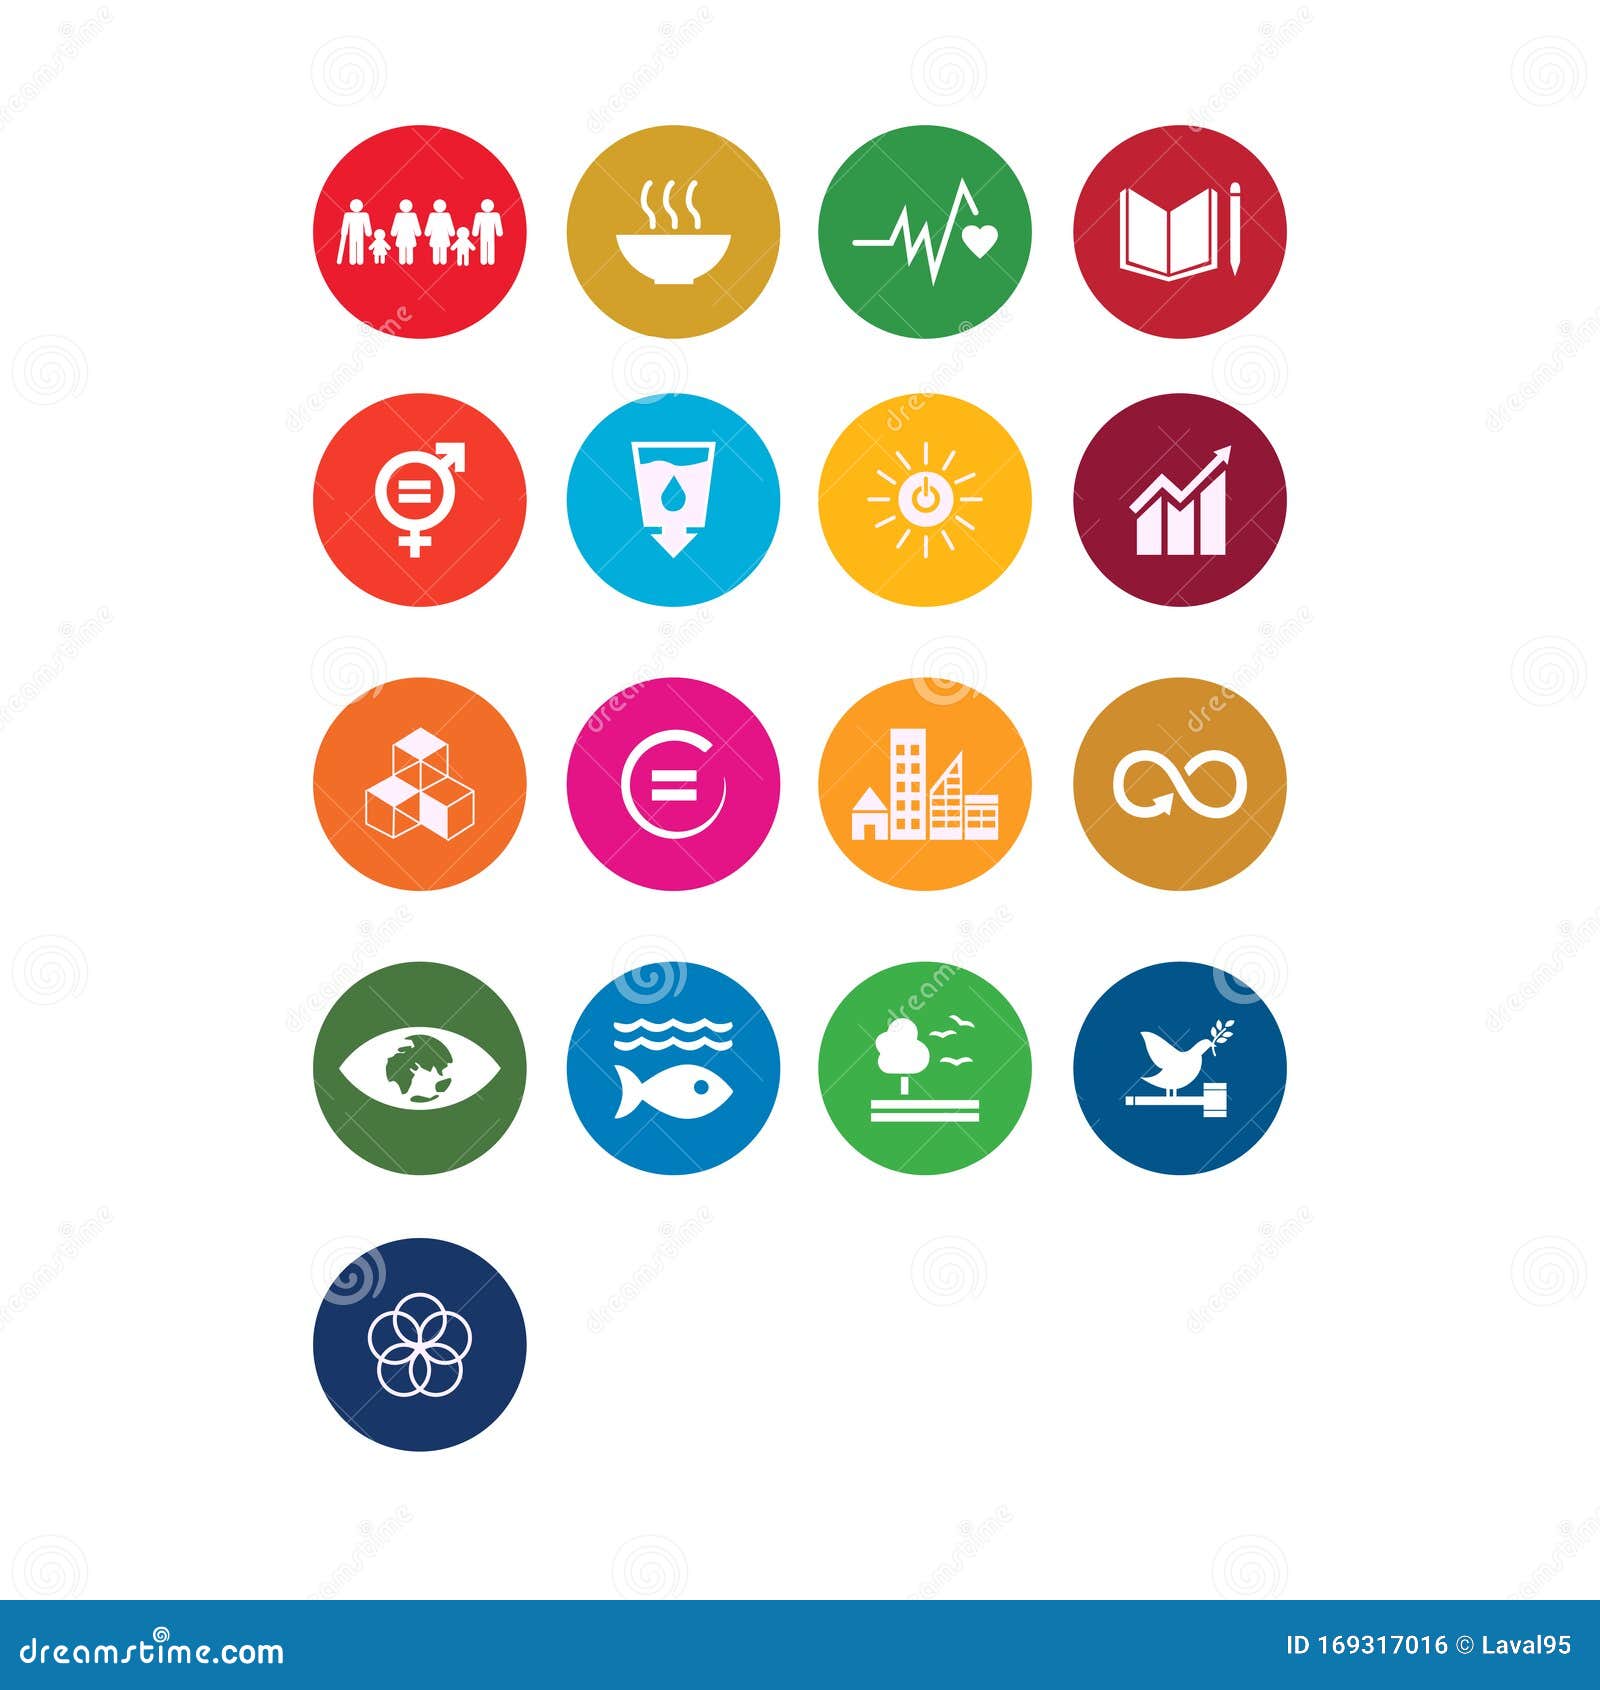 ustainable development goals - the united nations. sdg. colorful icons.